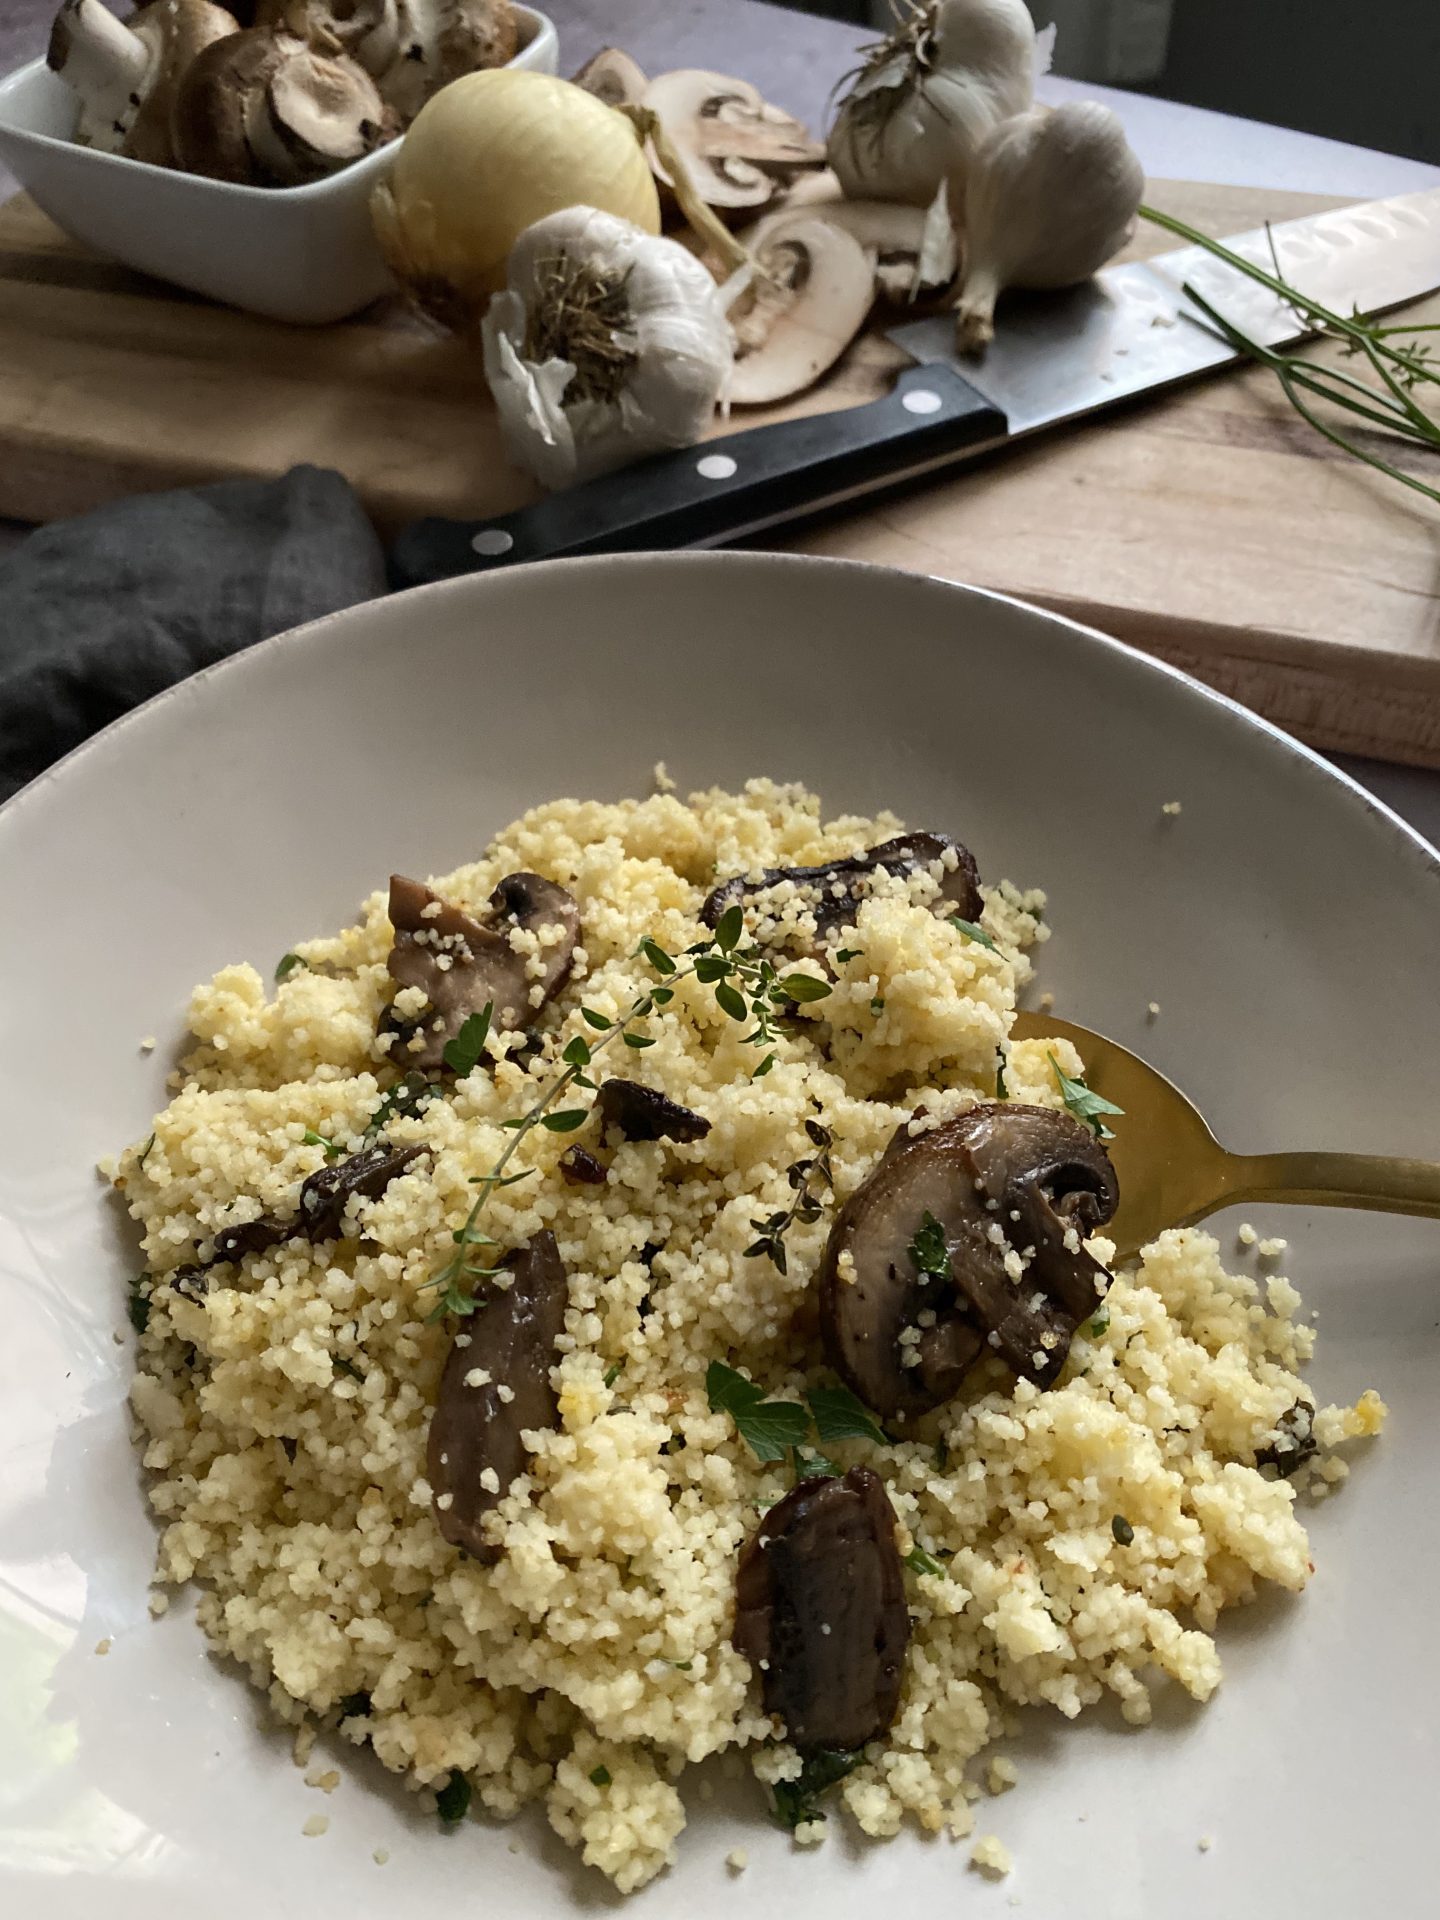 Lifestyle Blogger Chocolate and Lace shares her recipe for the Best Mushroom Herb Couscous.